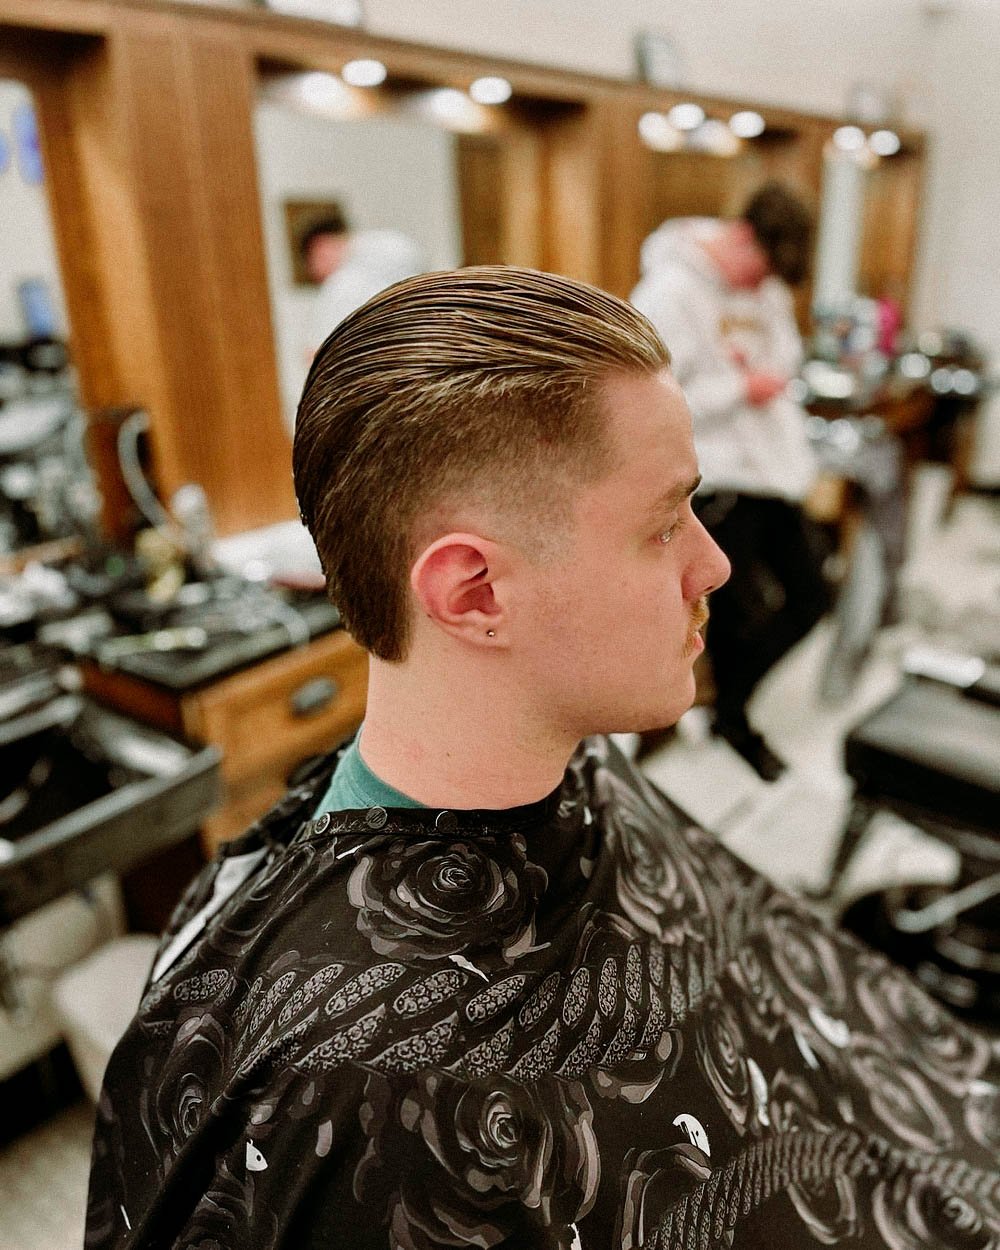 Men Hairstyles - 5. Sweep Back The sweep back has a similar profile to slicked  back hair but has a more tousled, windswept finish. That works really well  for medium men's hair